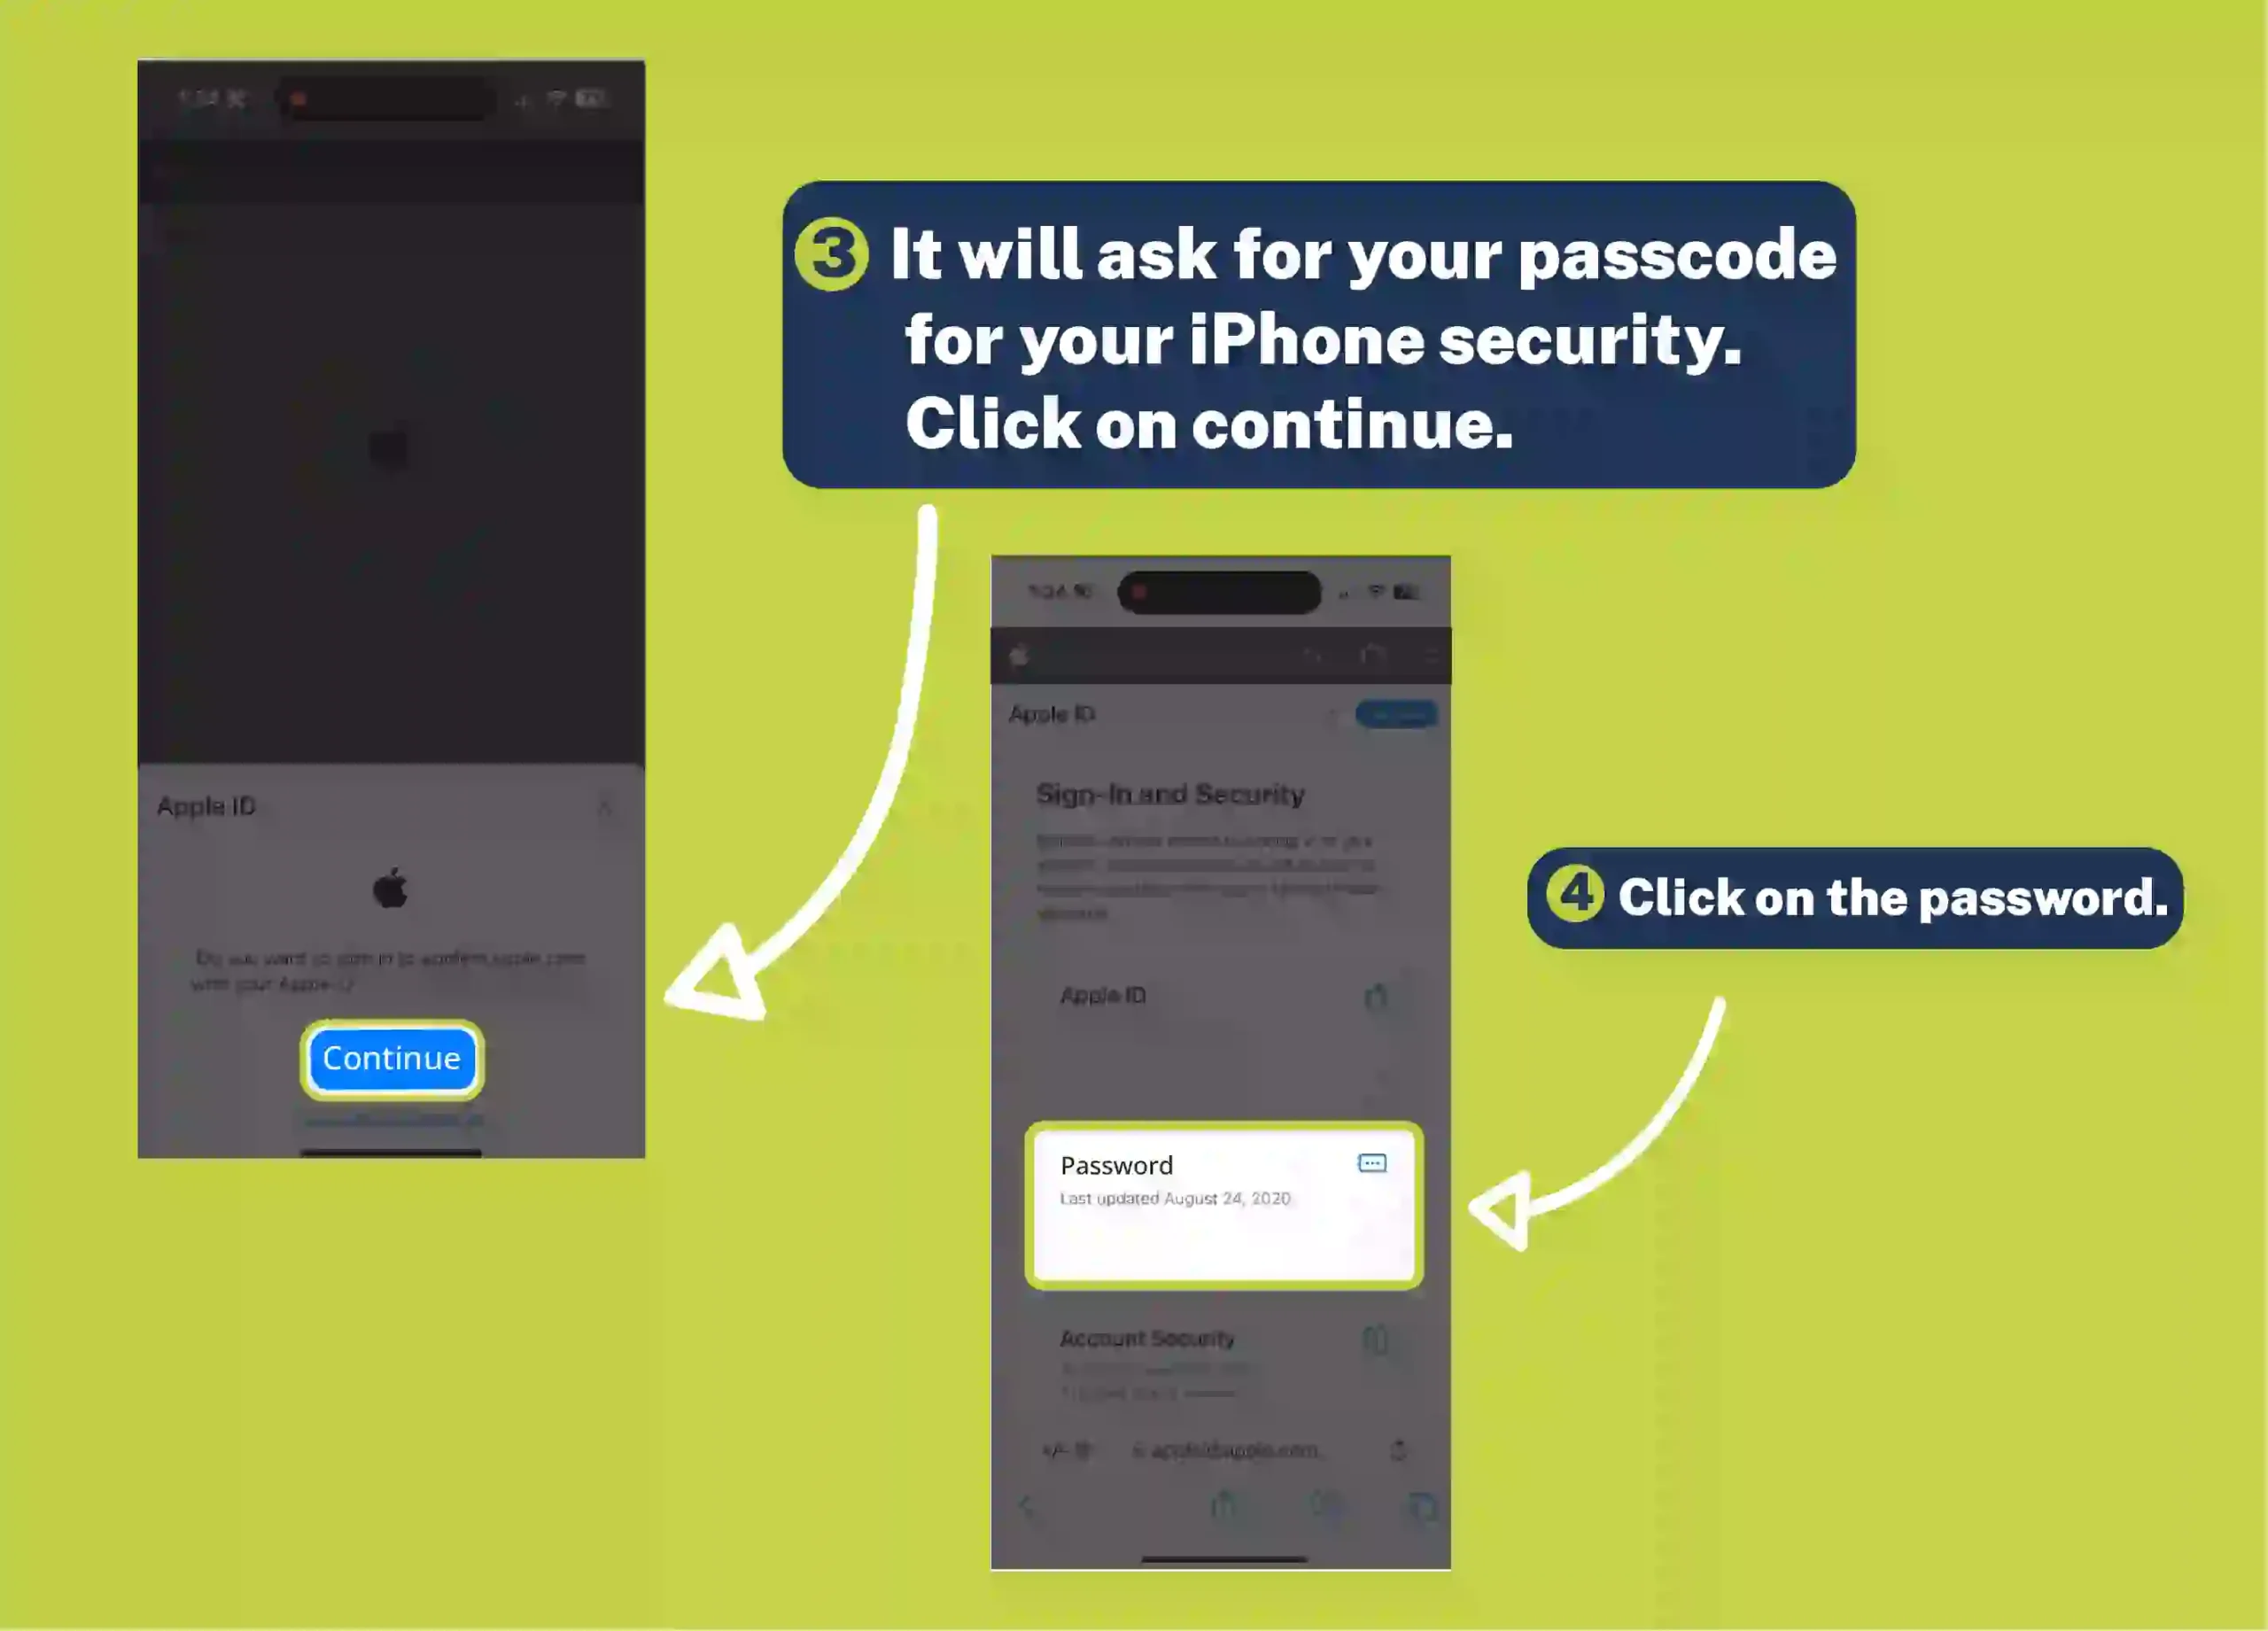 how to change your Apple ID password on an iPhone using passcode